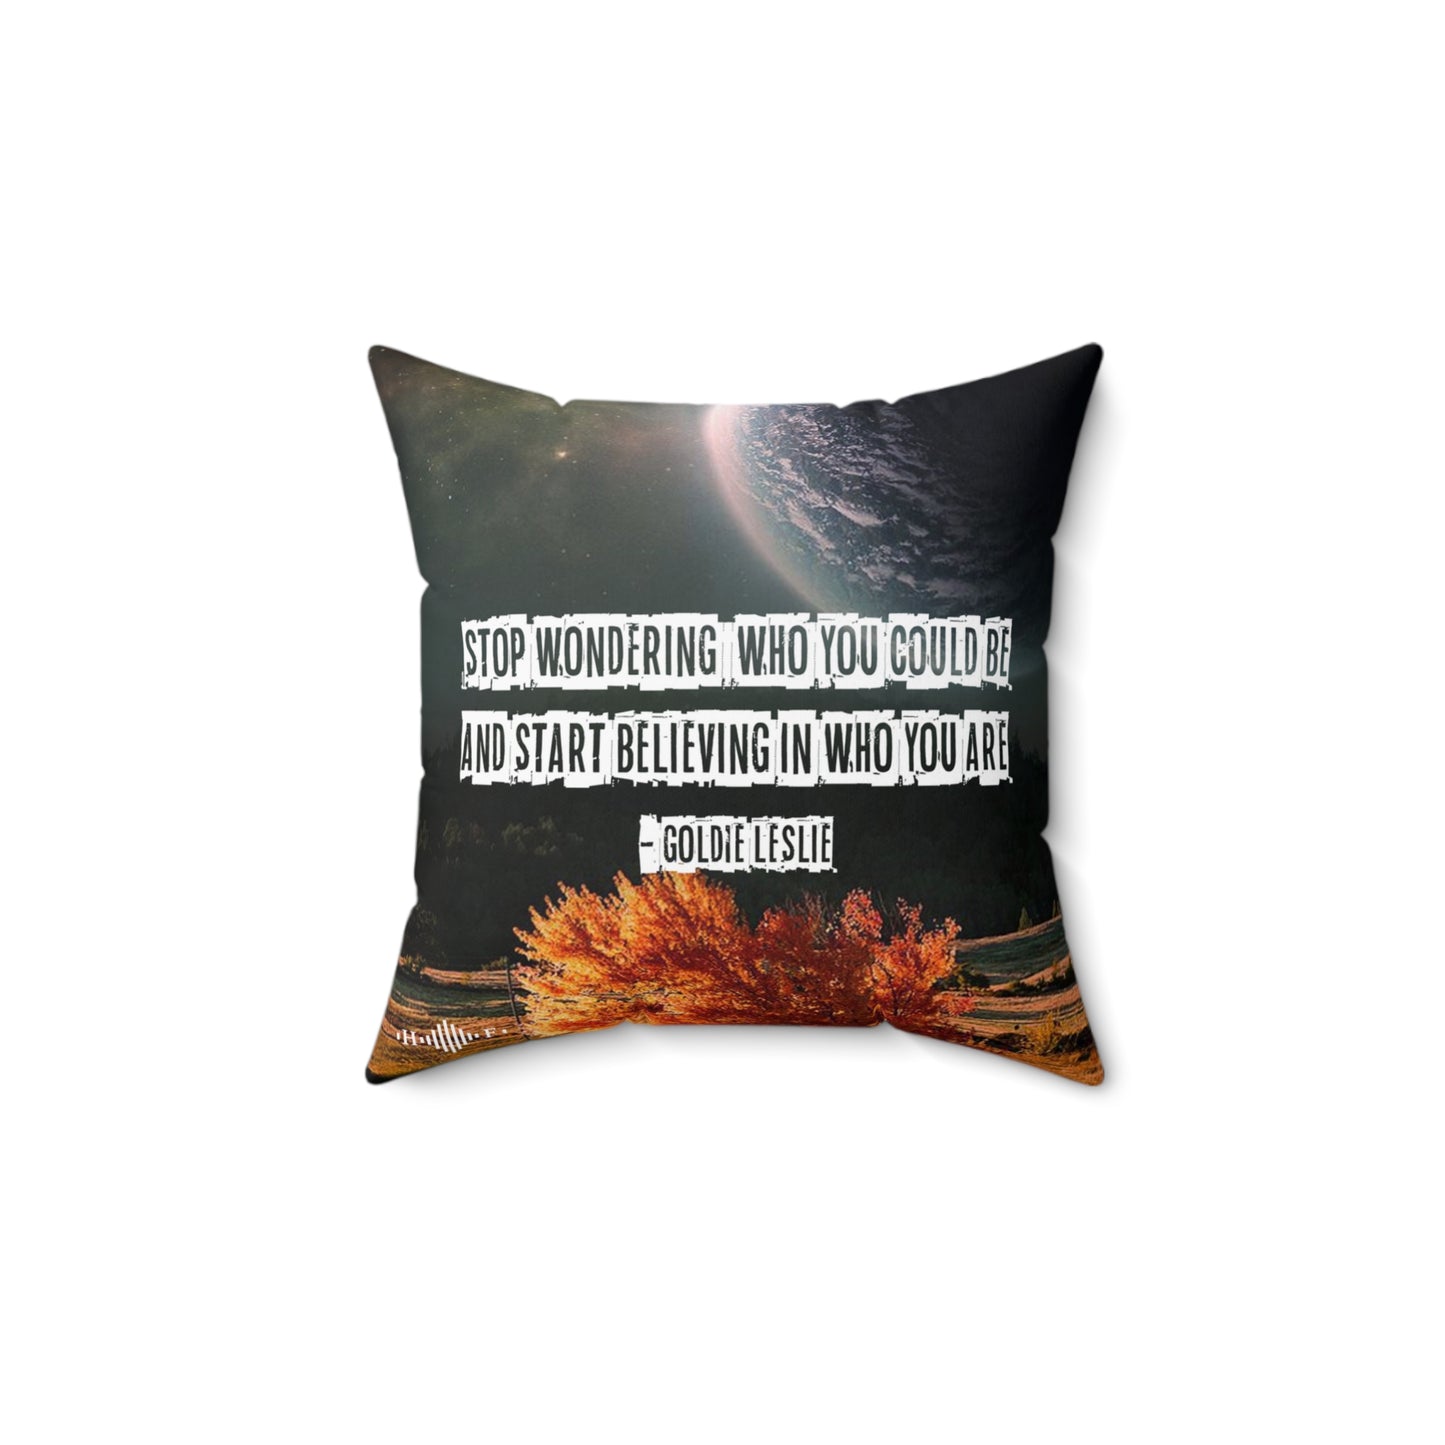 Growth is key - Square Pillow